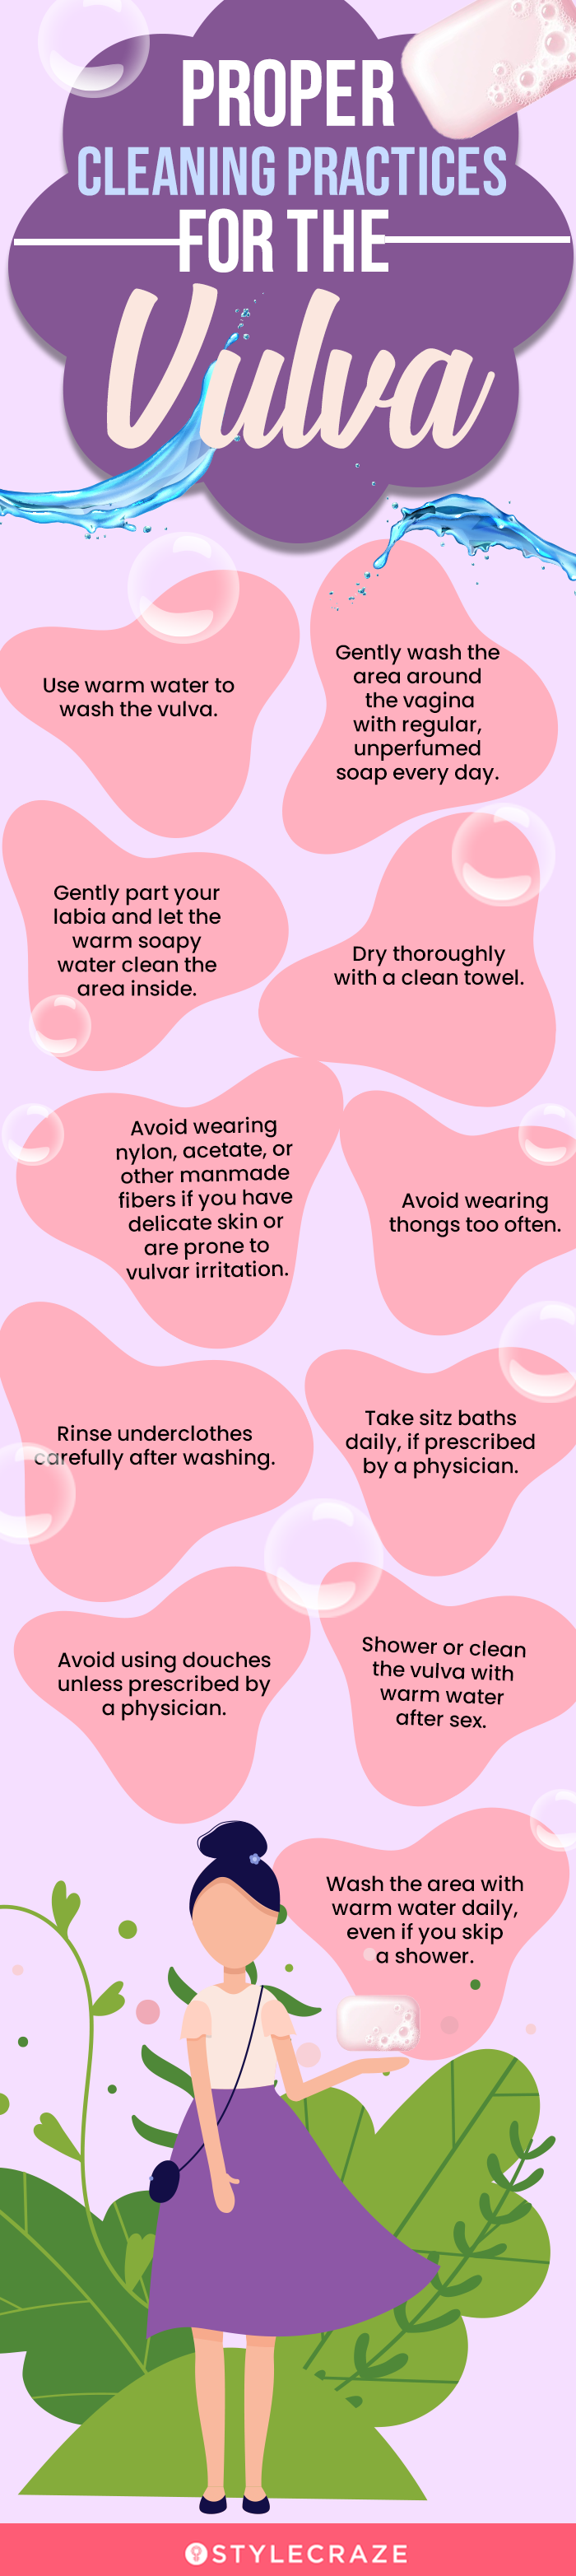 Proper Cleaning Practices For The Vulva (infographic)